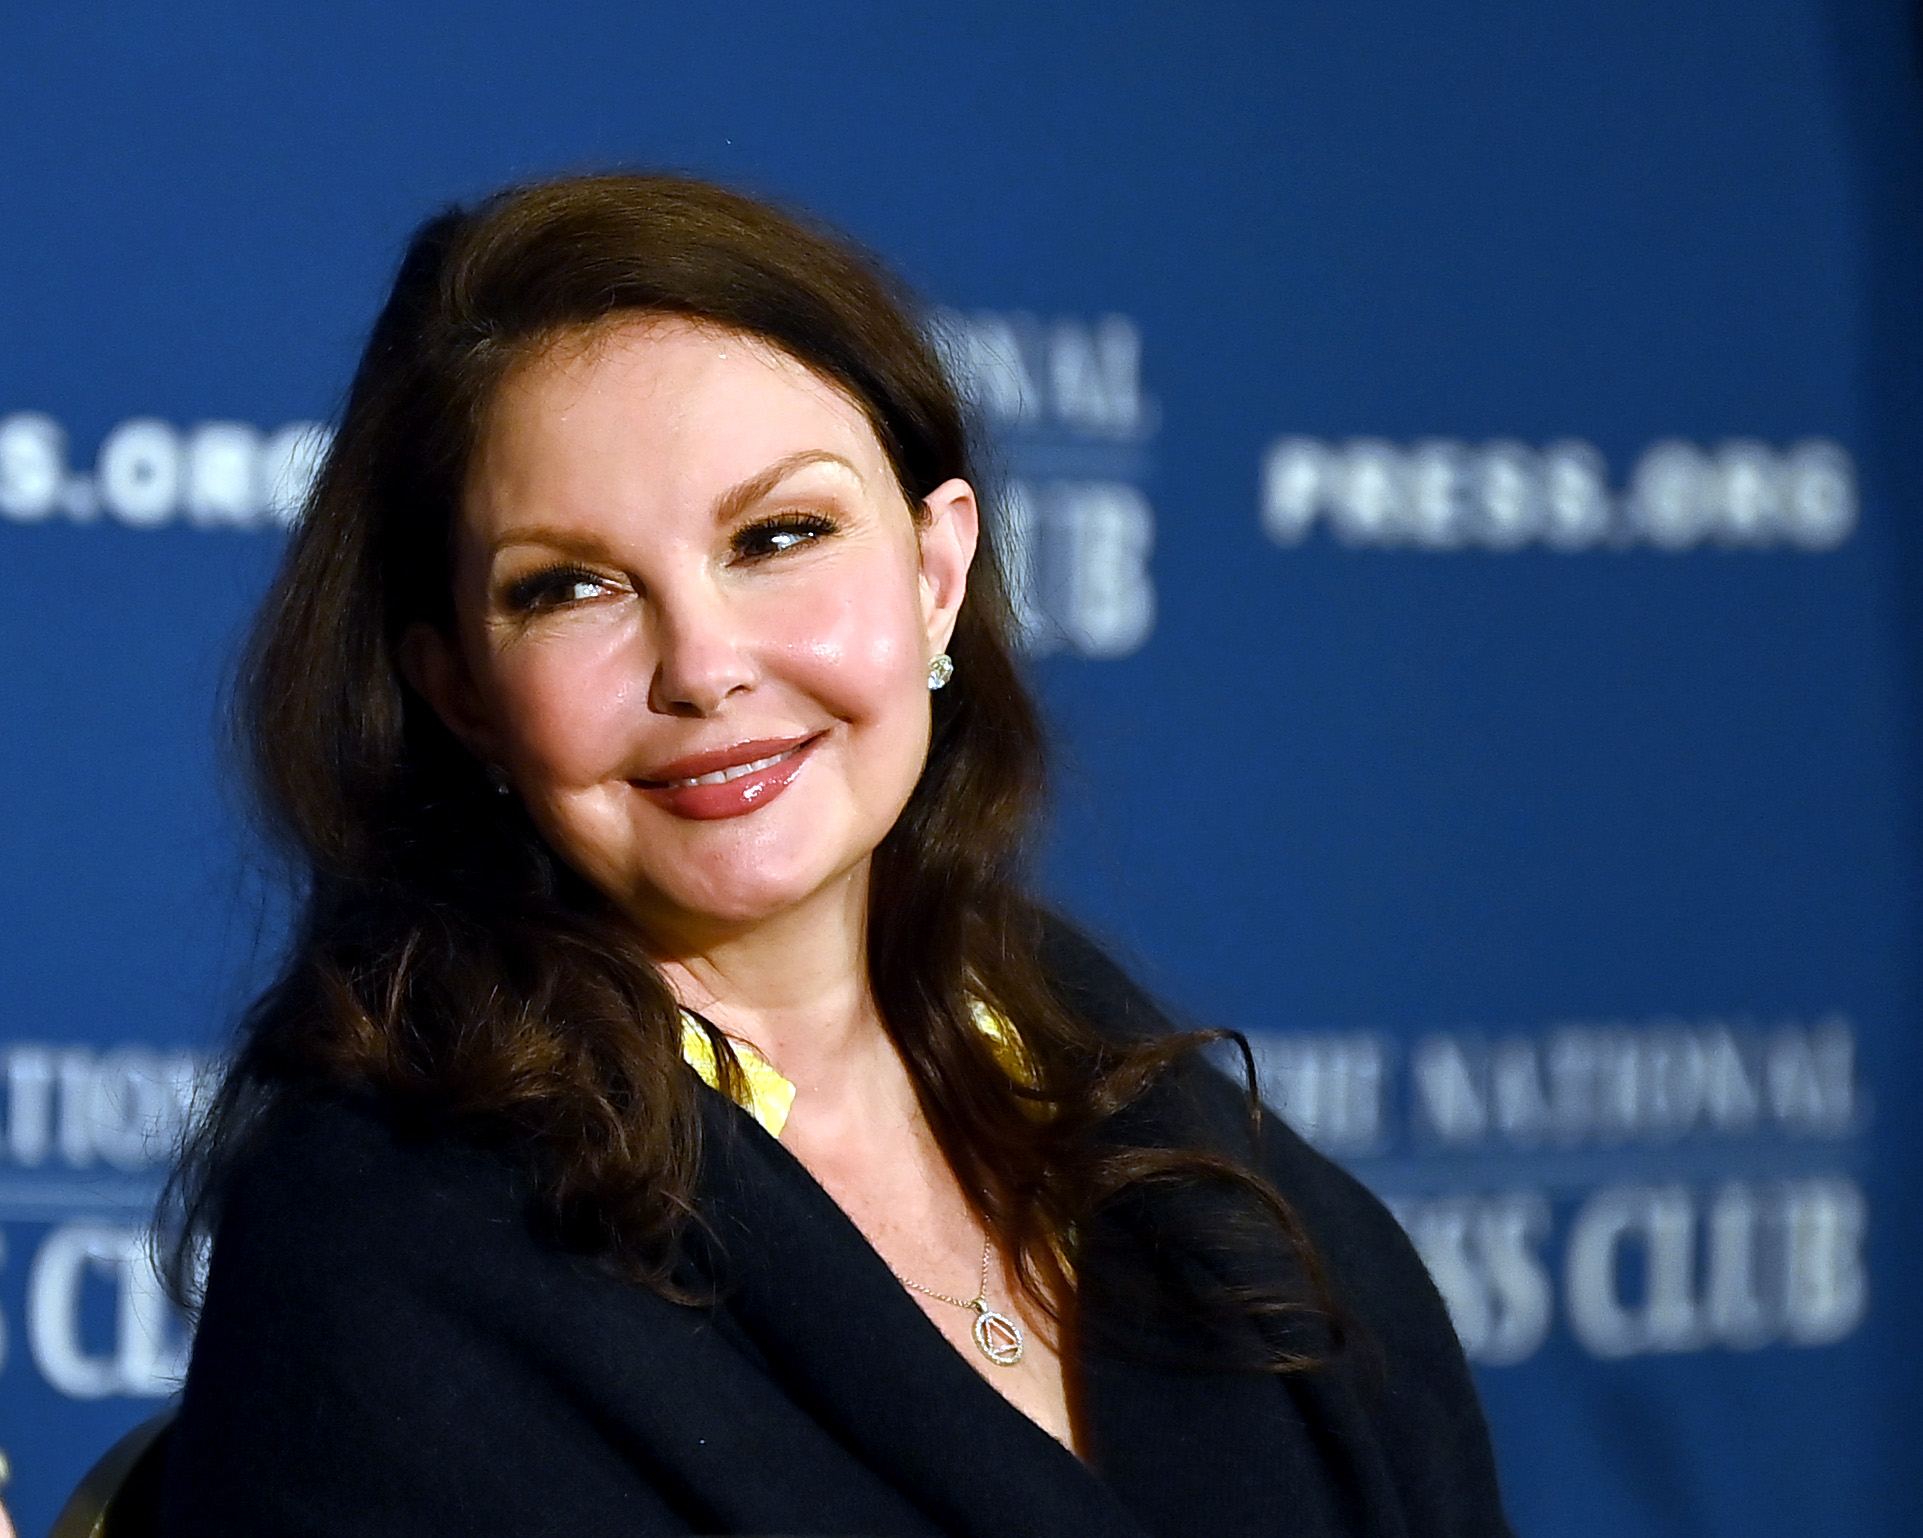 Ashley Judd discusses the need for responsible and respectful reporting on suicides at a luncheon in Washington, DC, on May 9, 2023. | Source: Getty Images